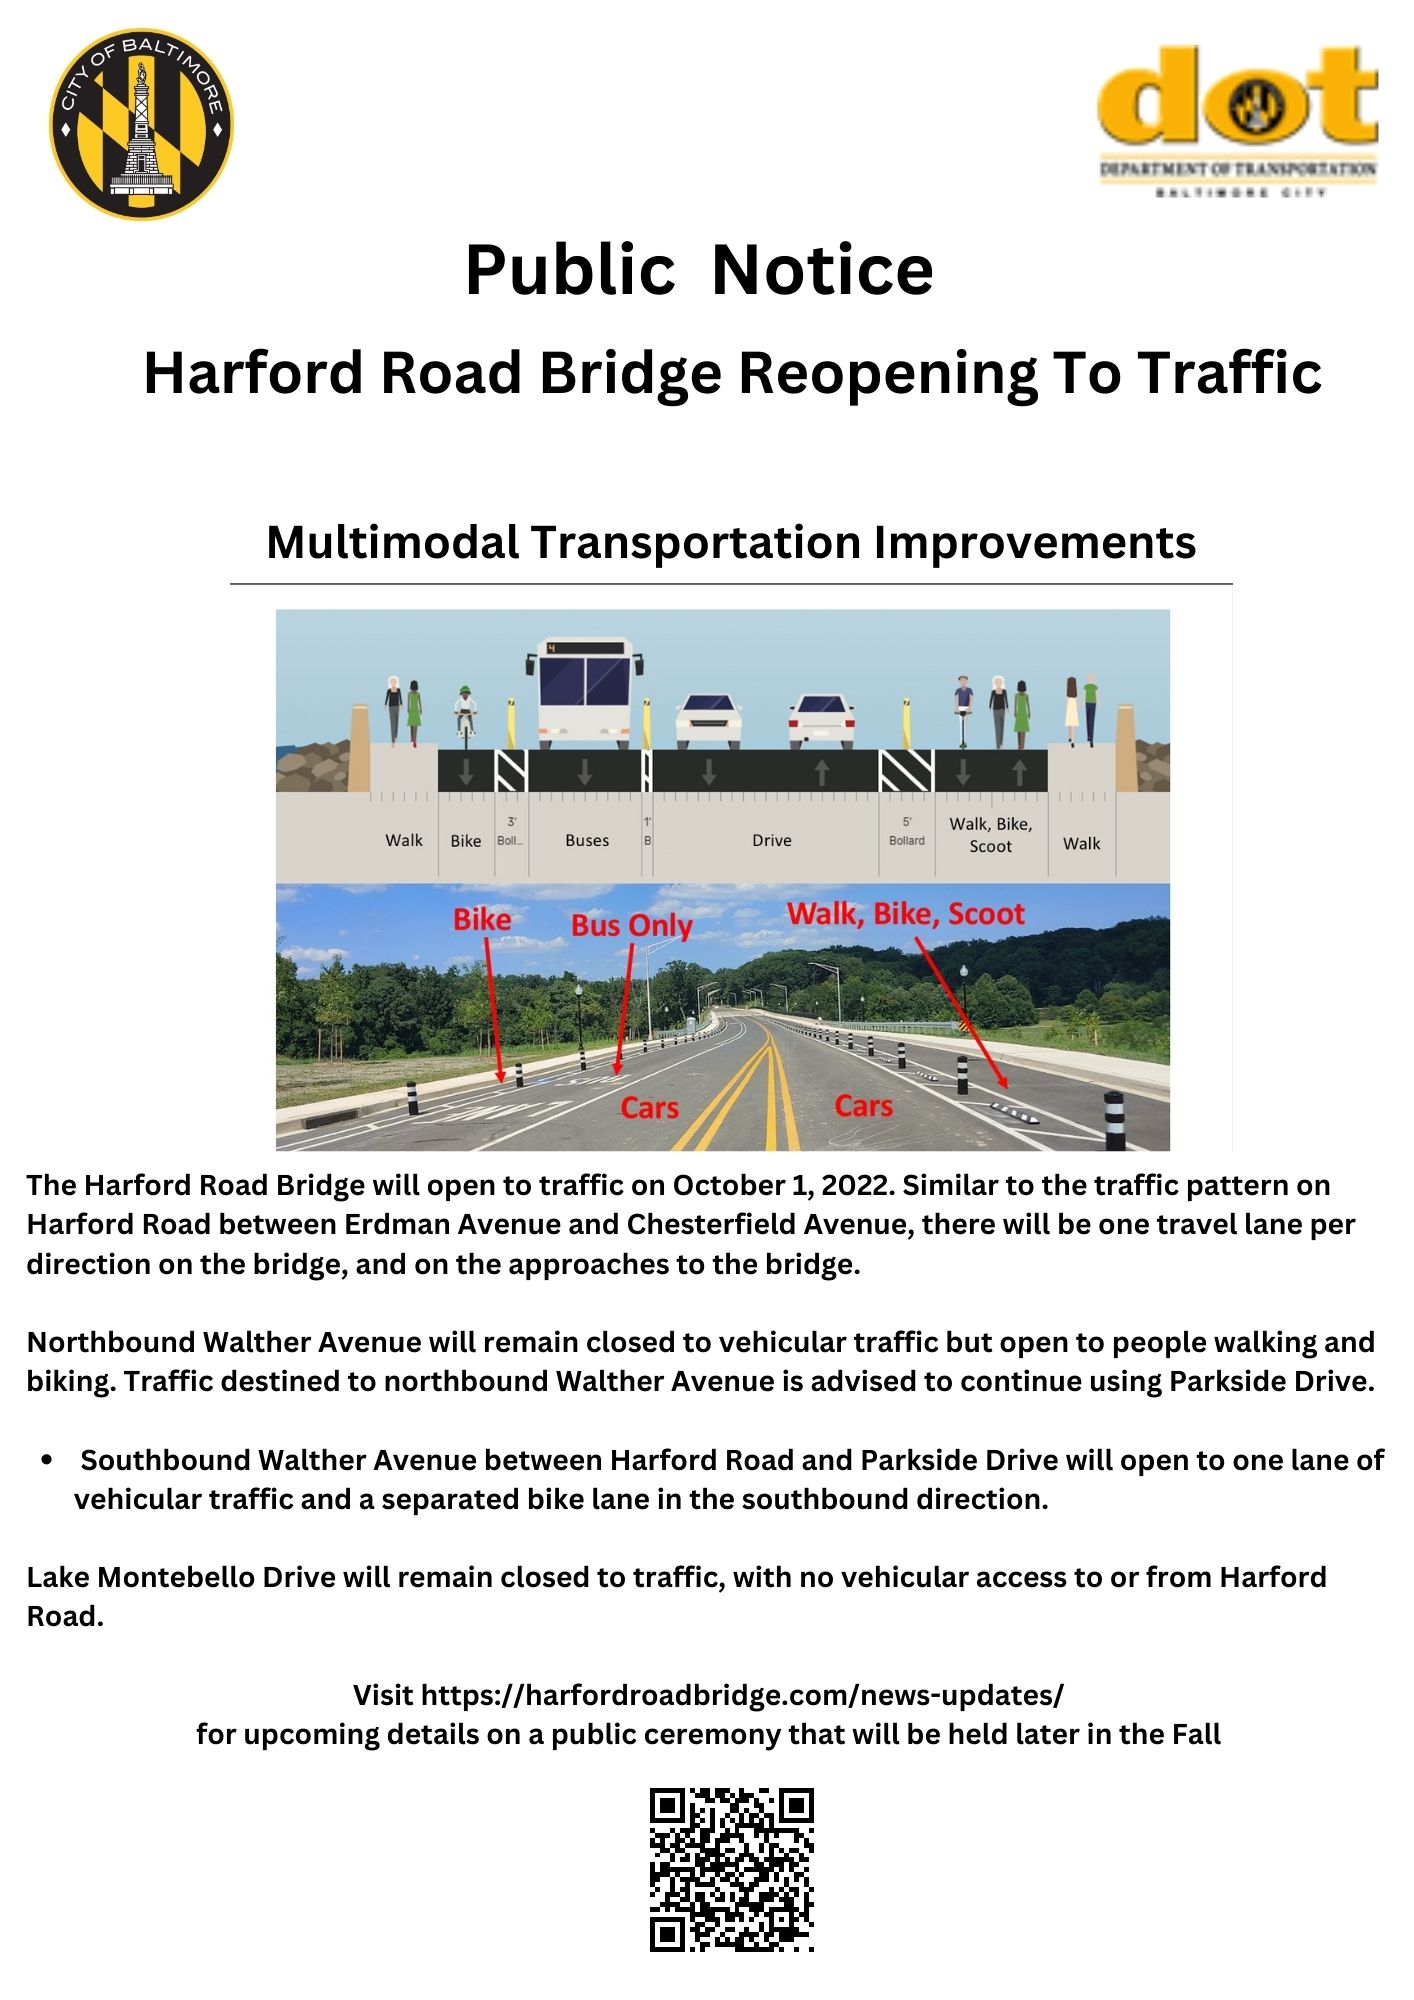 Image announcing Harford Road Bridge Reopening on October 1, 2022